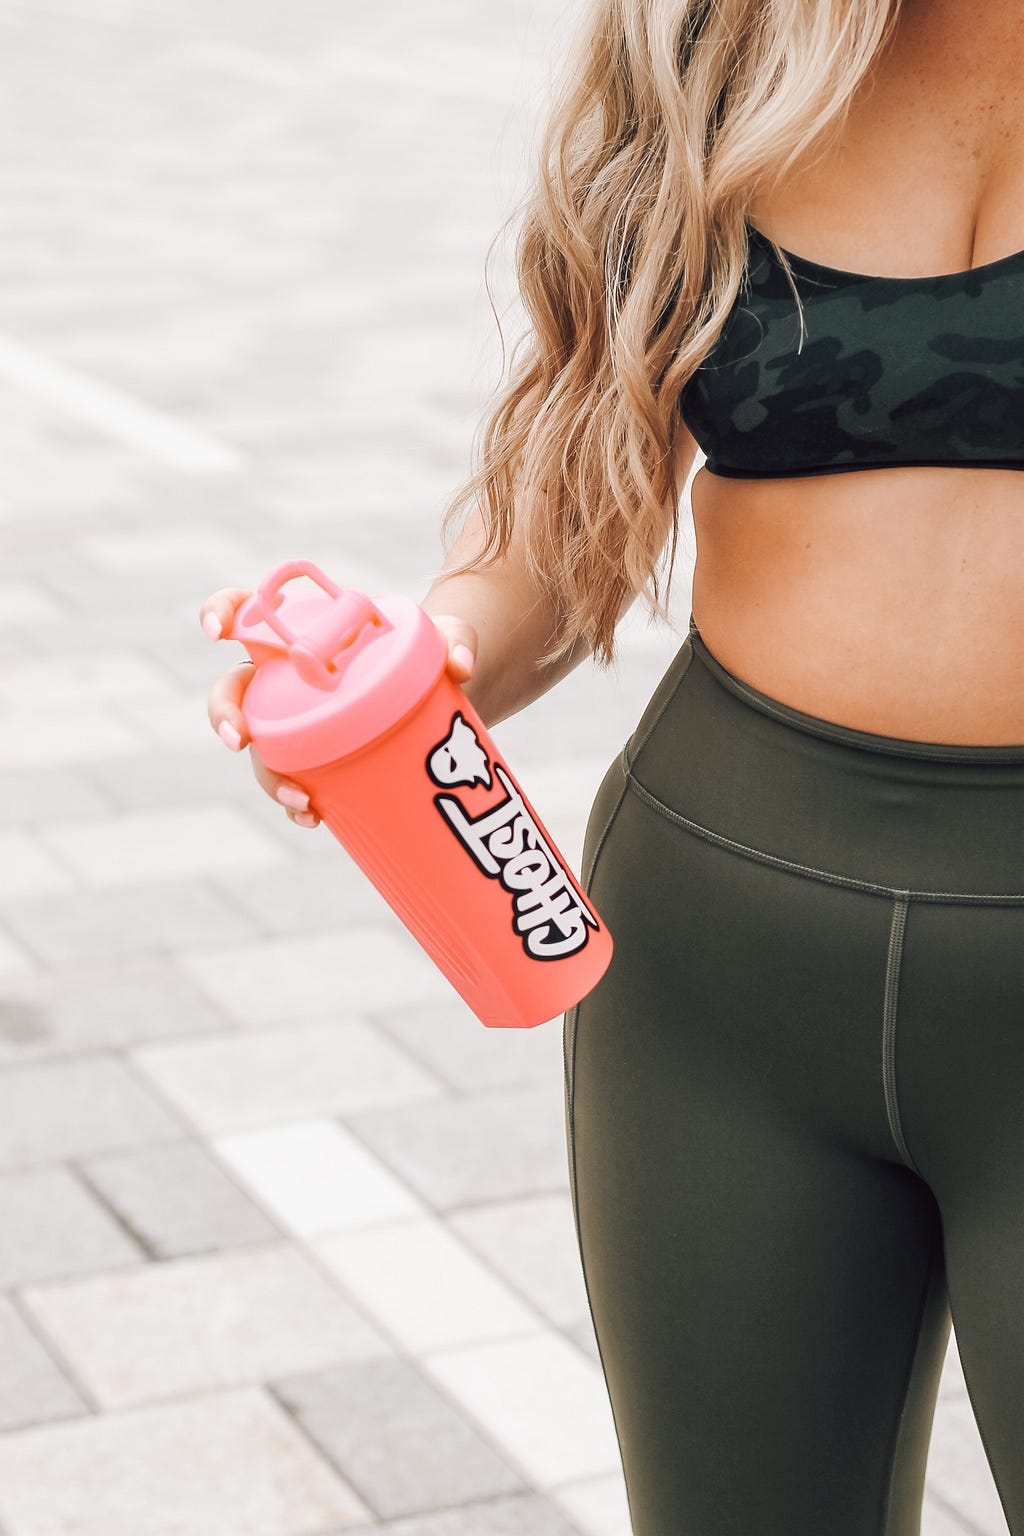 A picture of a young woman holding a protein shaker bottle